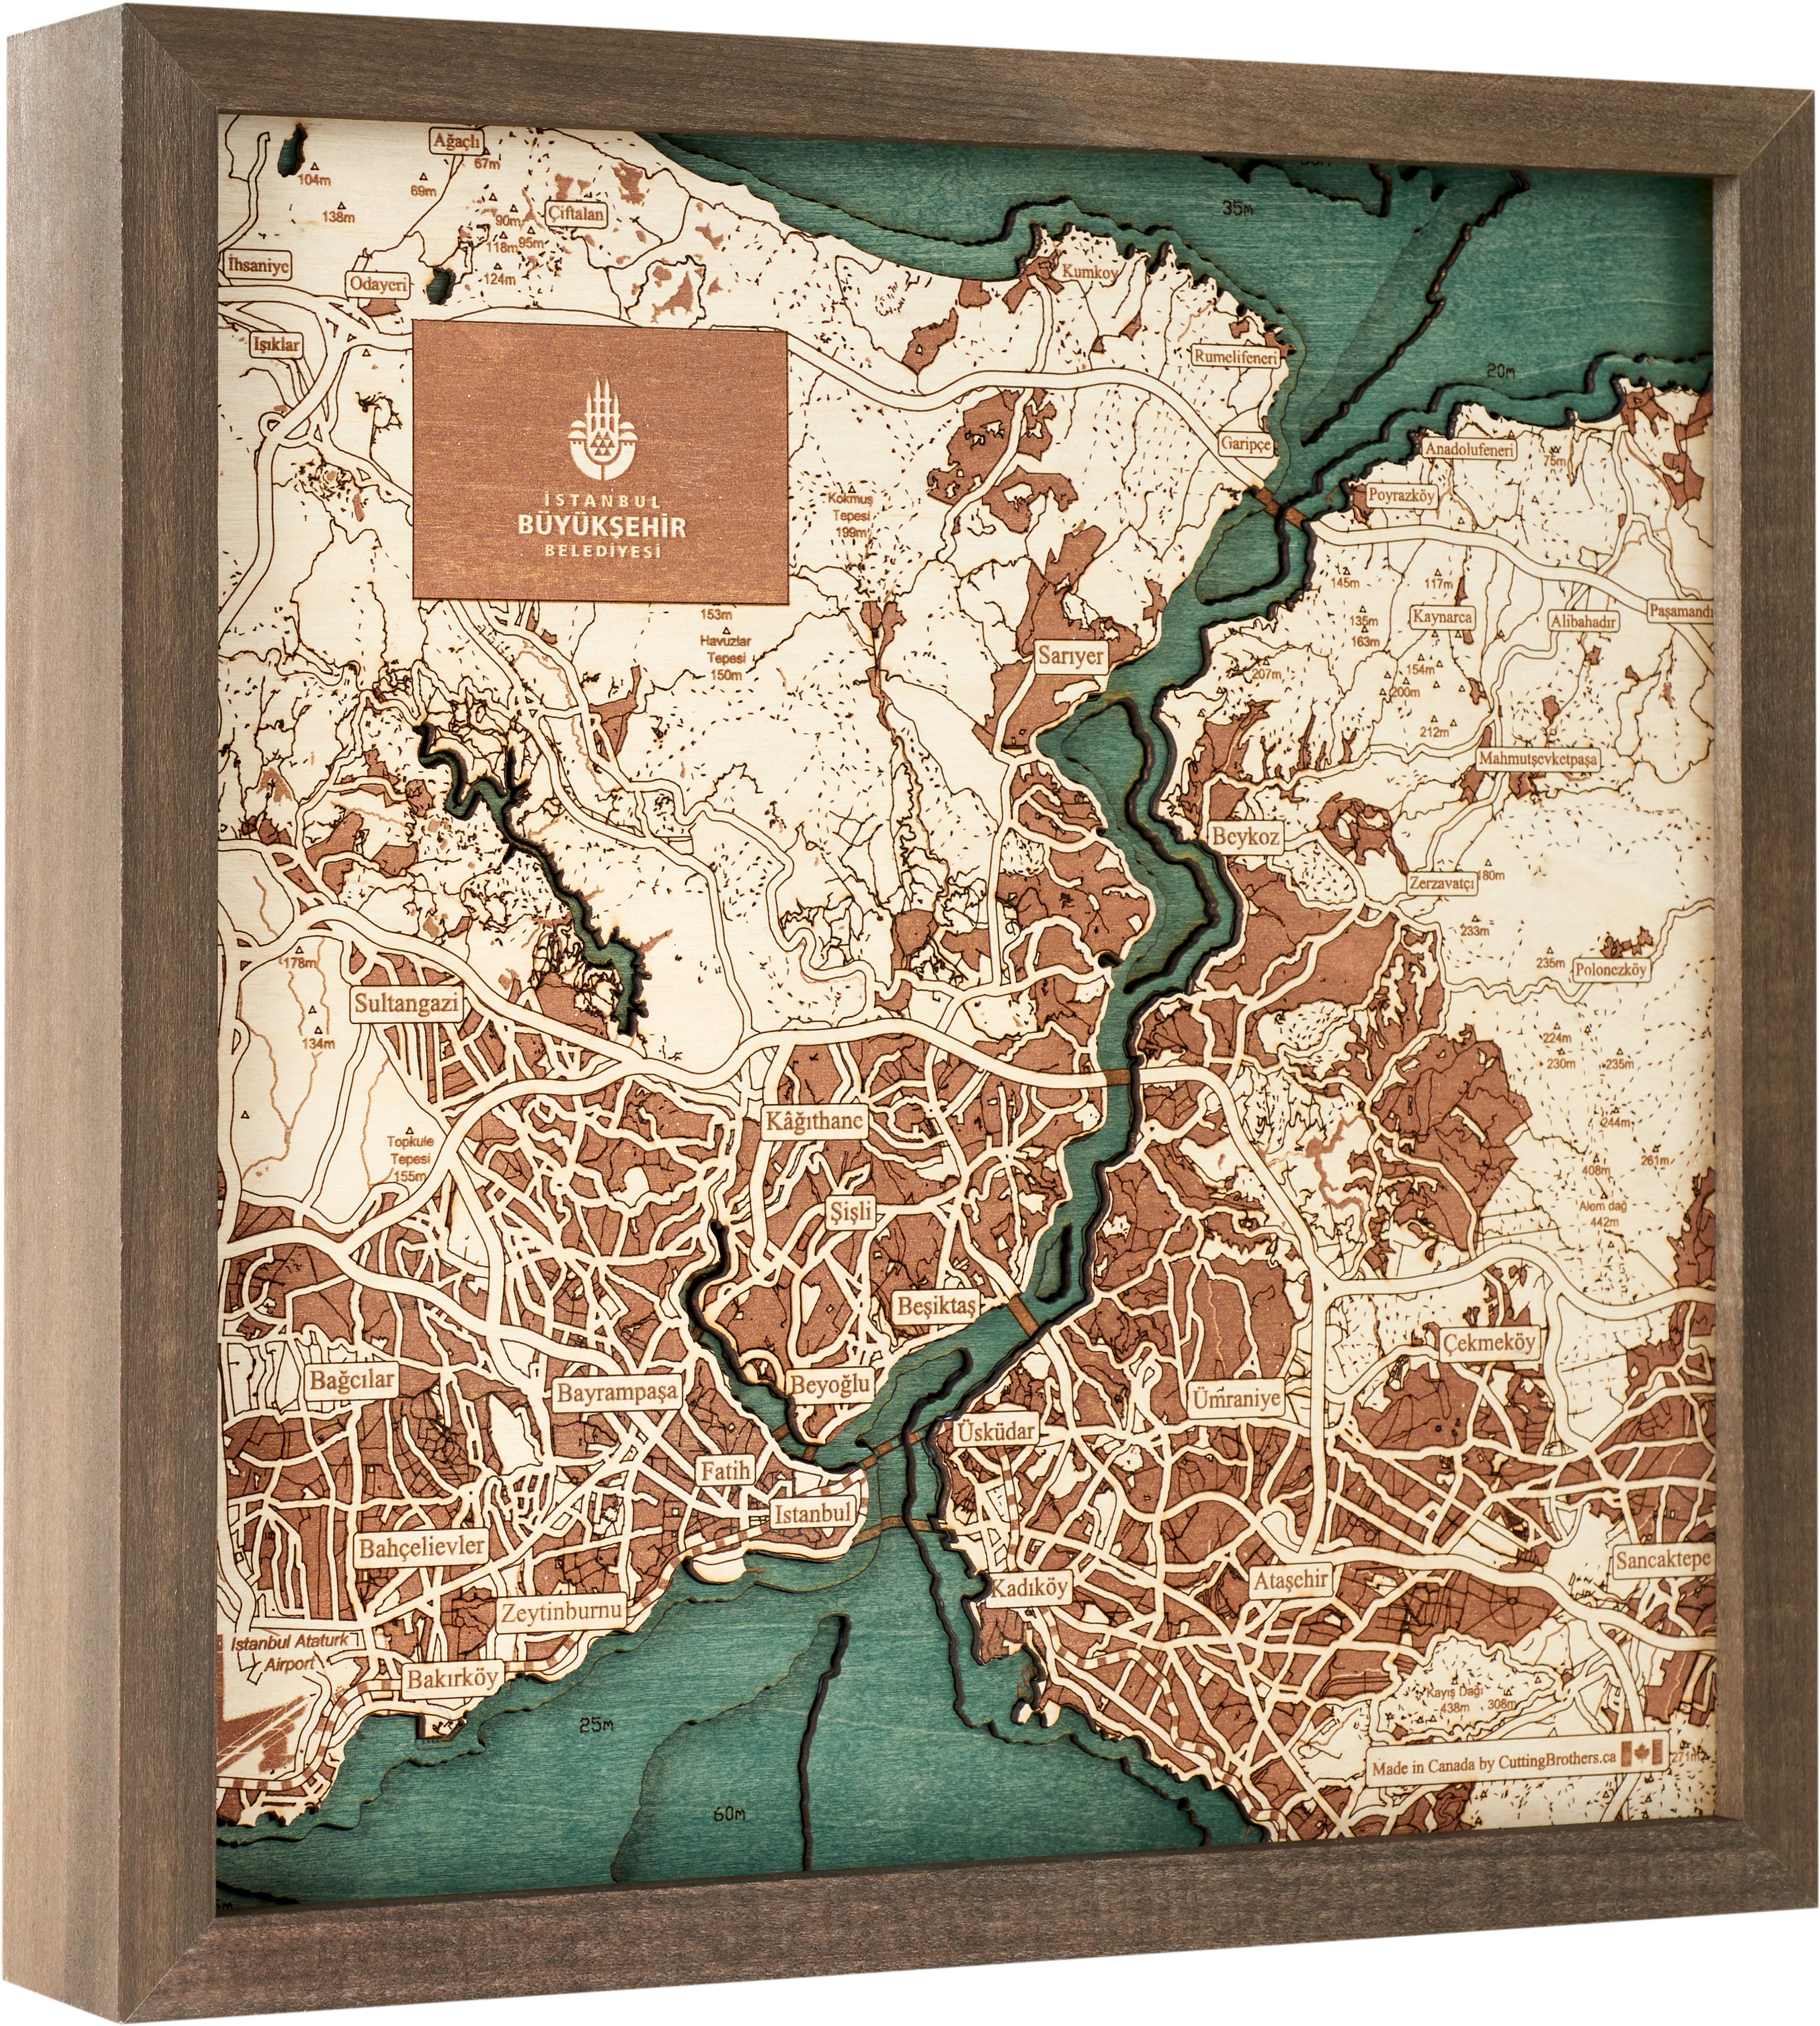 ISTANBUL 3D Wooden Wall Map - Version S